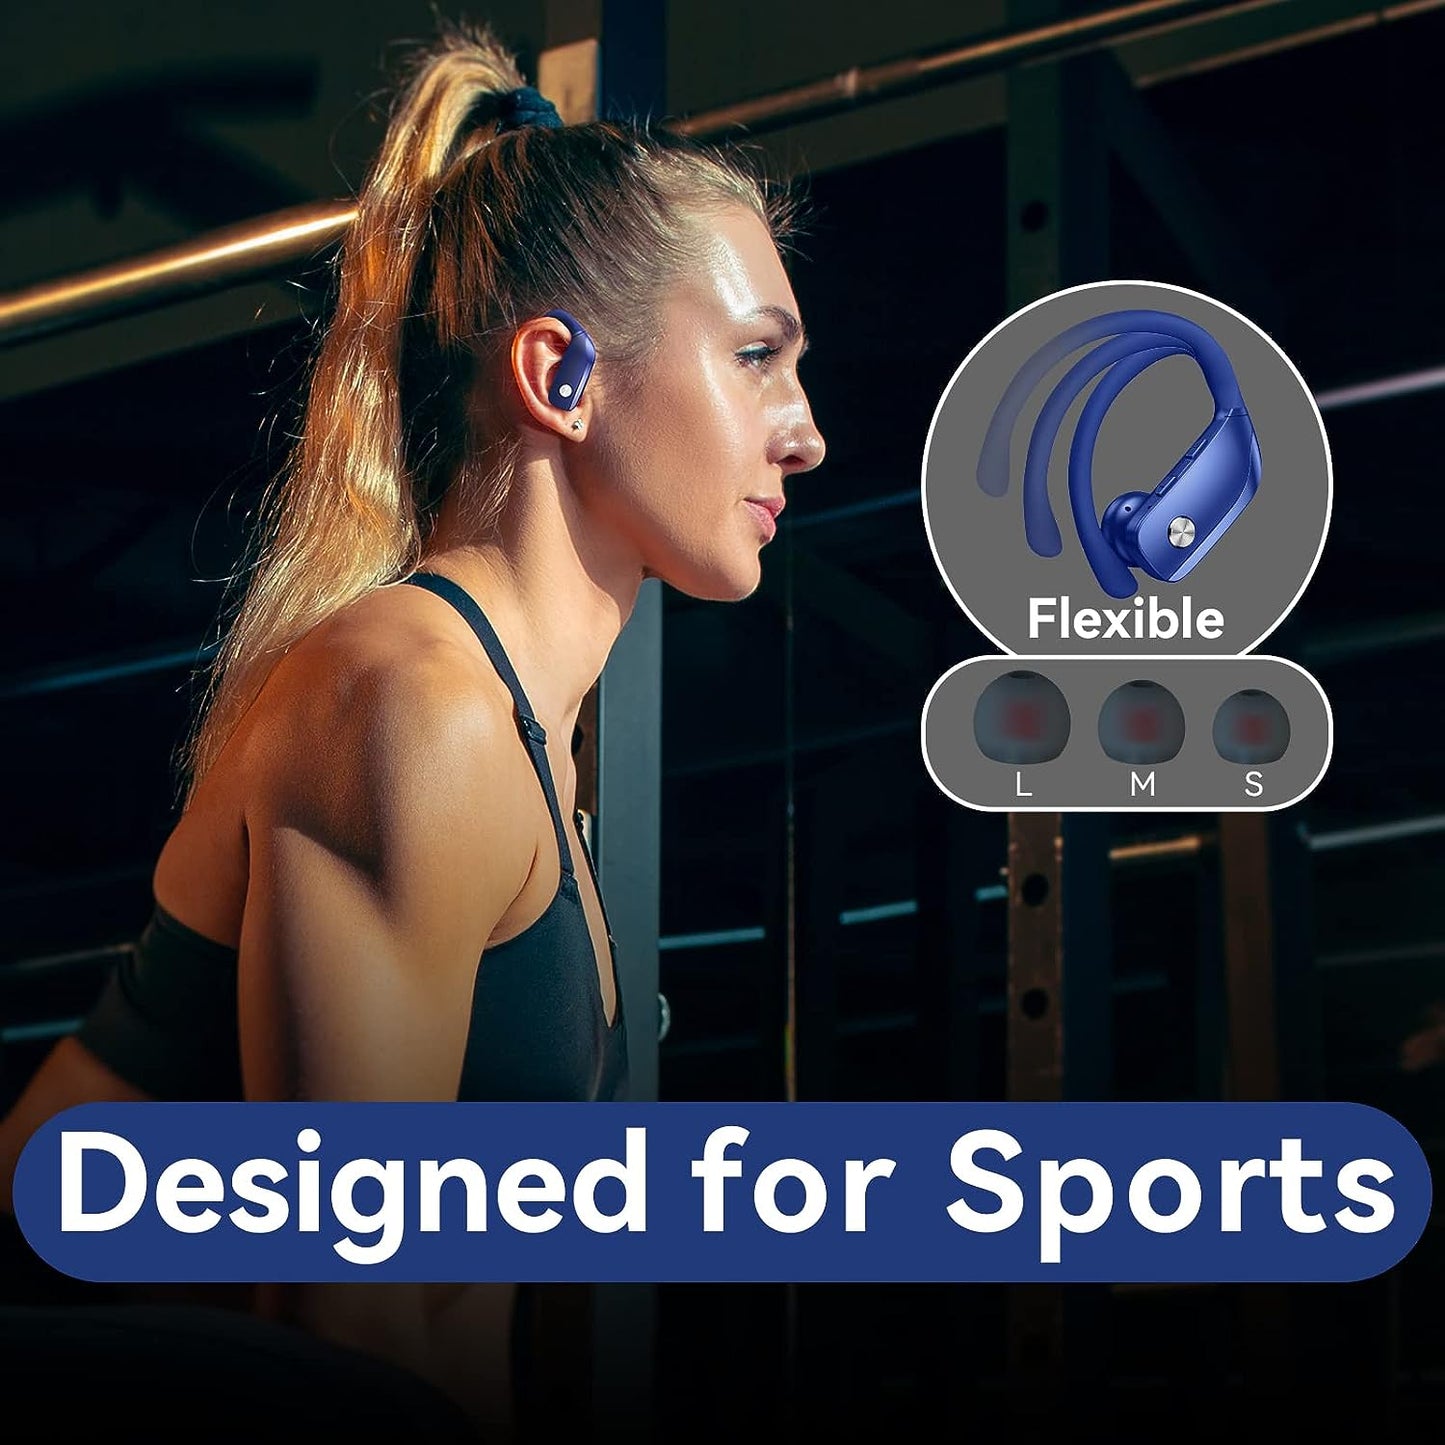 GM T16 running earbuds Wireless Earbuds Bluetooth Headphones 48hrs Play Back Sport Earphones with LED Display Over-Ear Buds with Earhooks Built-in Mic Headset for Workout Blue